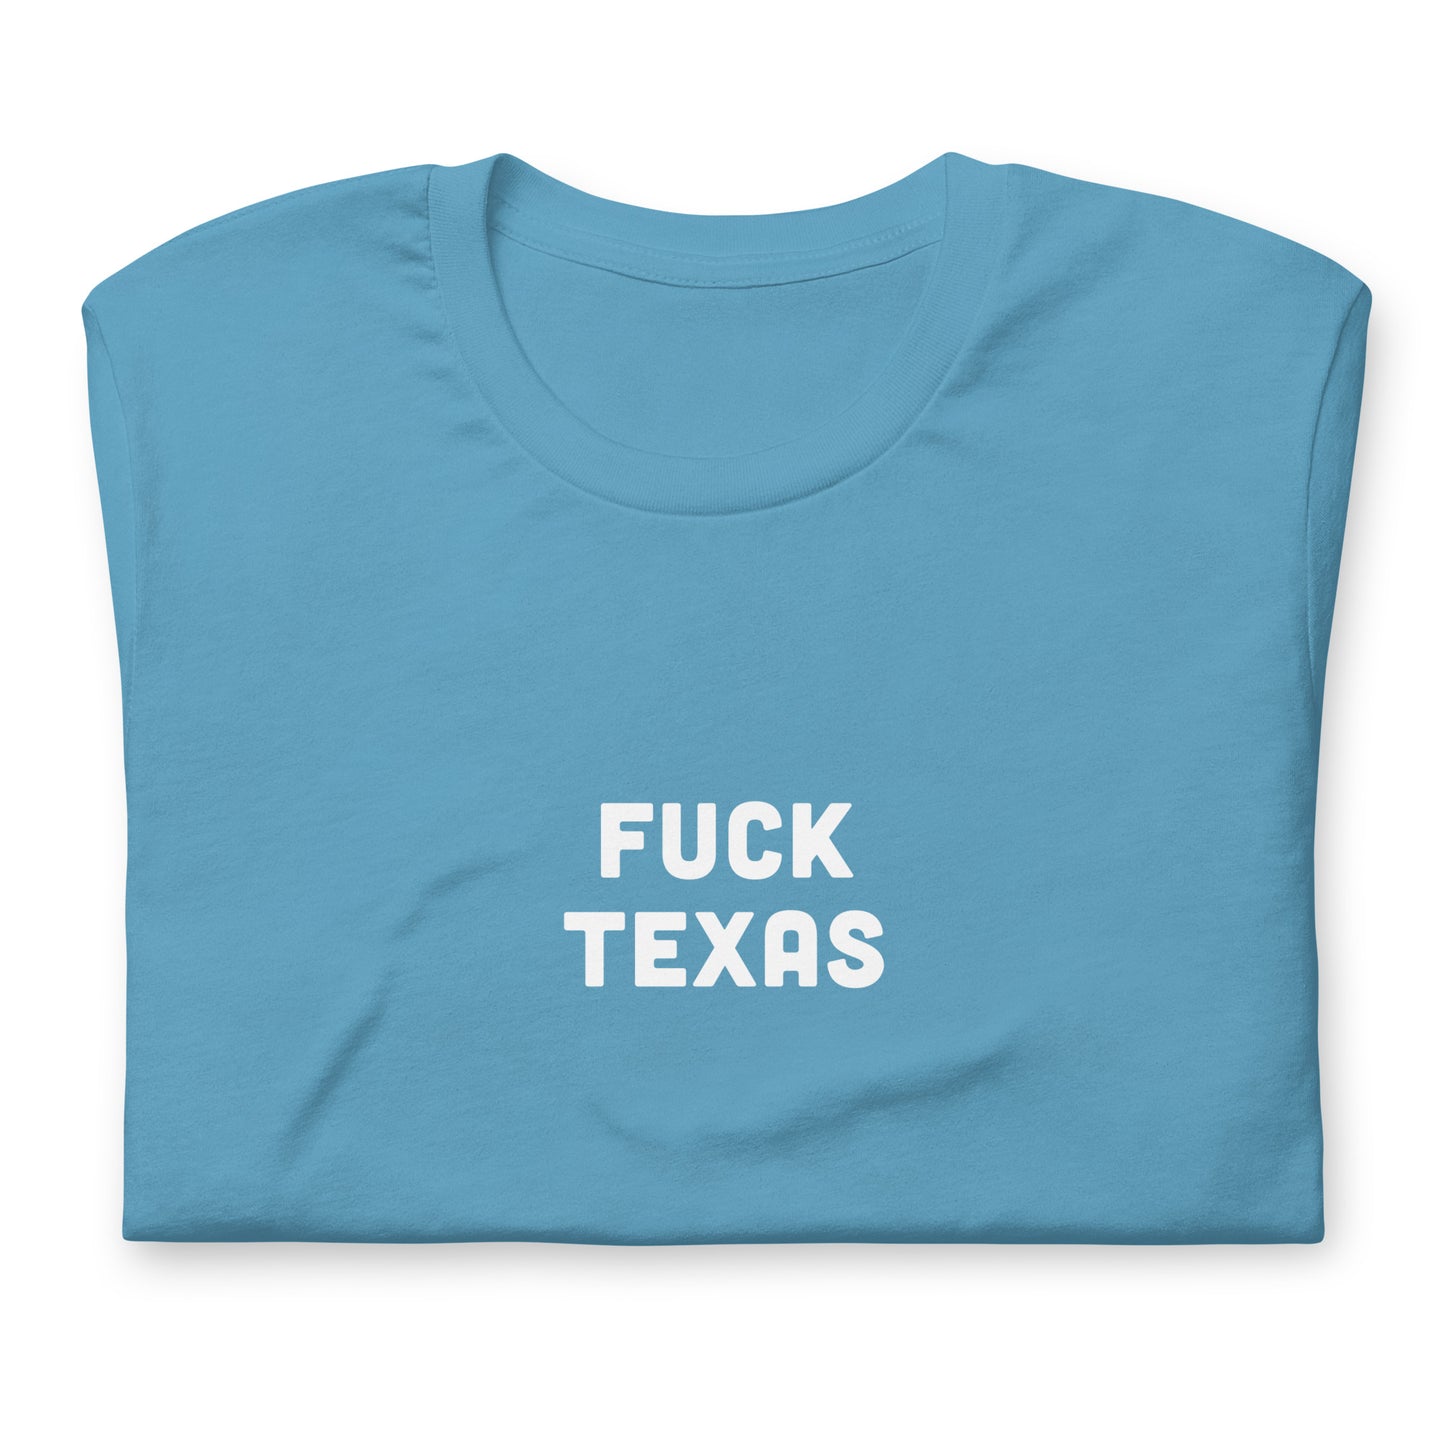 Fuck Texas T-Shirt Size 2XL Color Forest